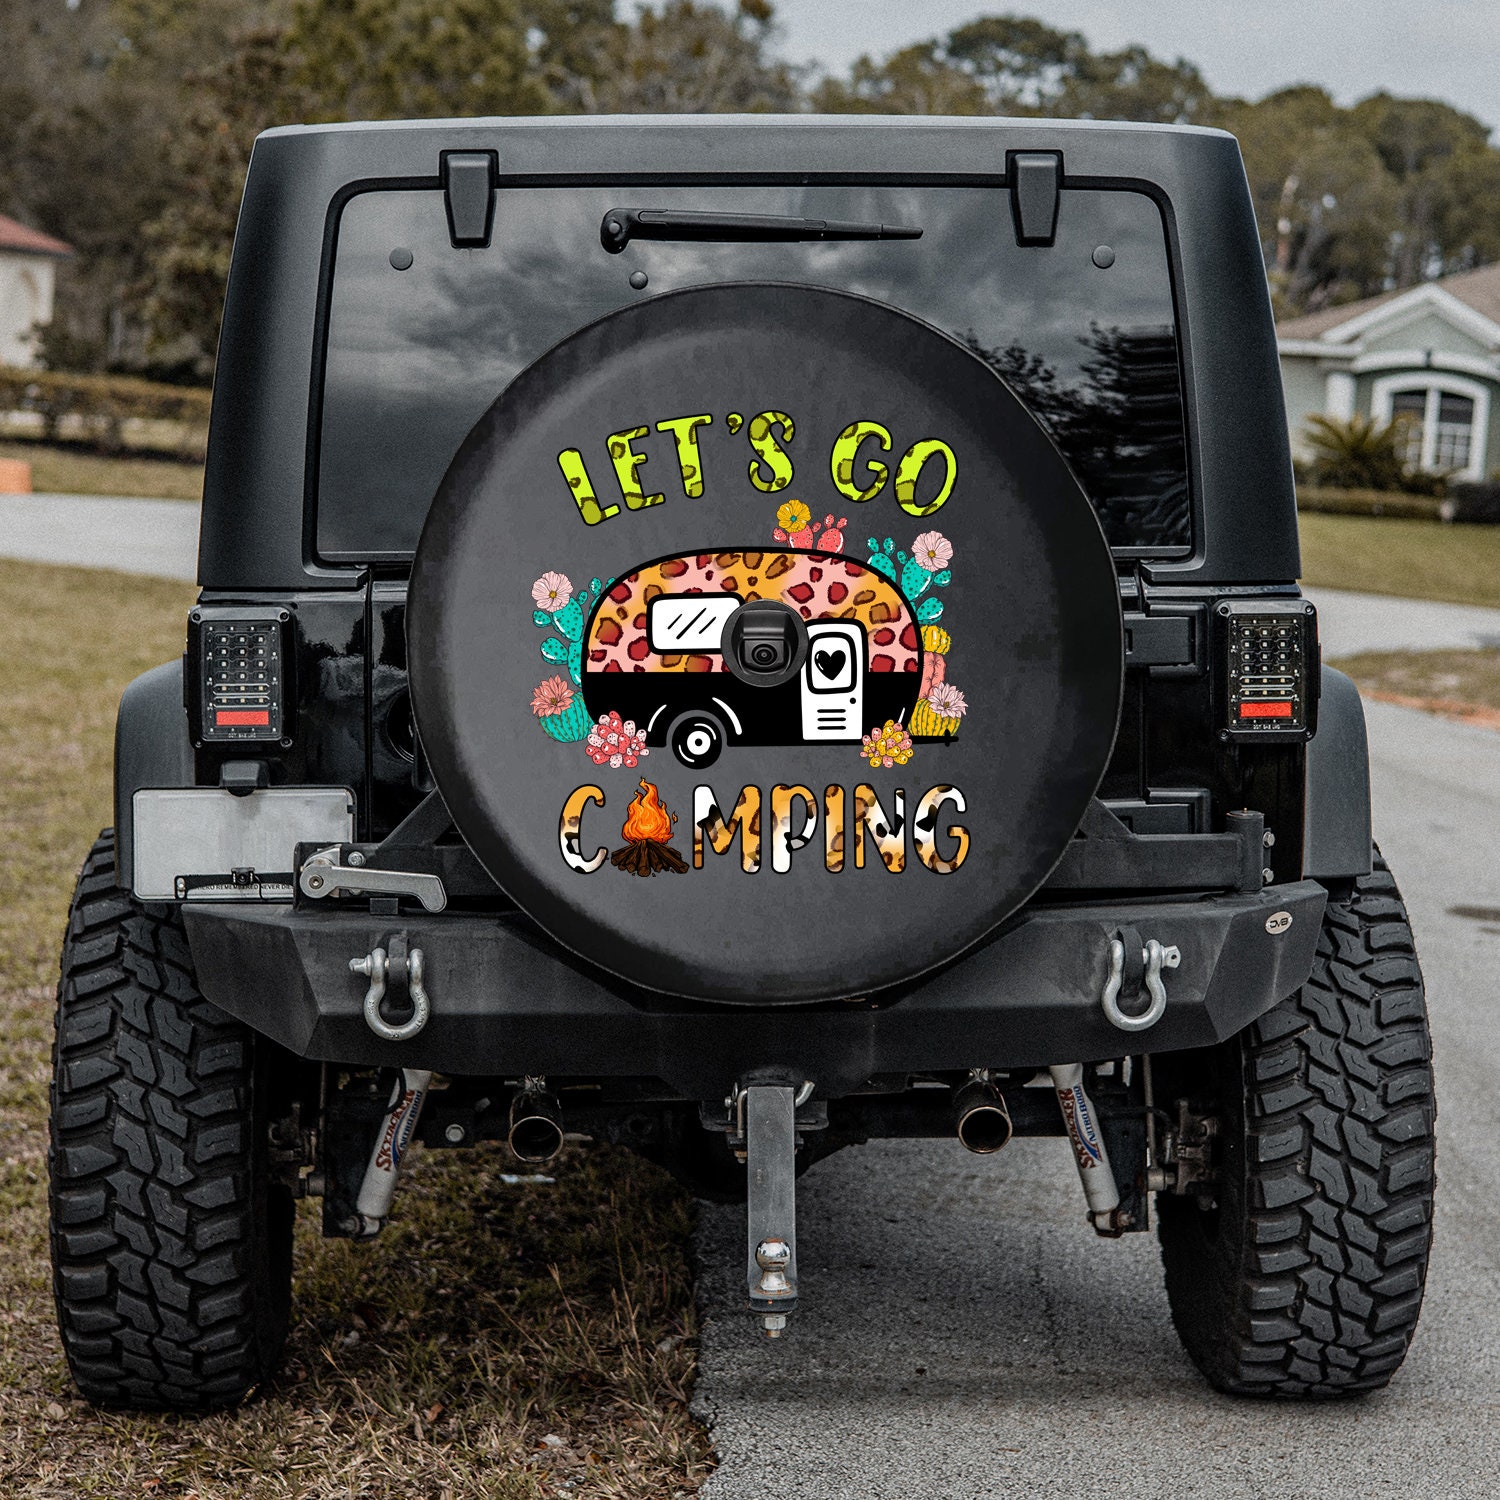 Lets Go Camping Tire Cover